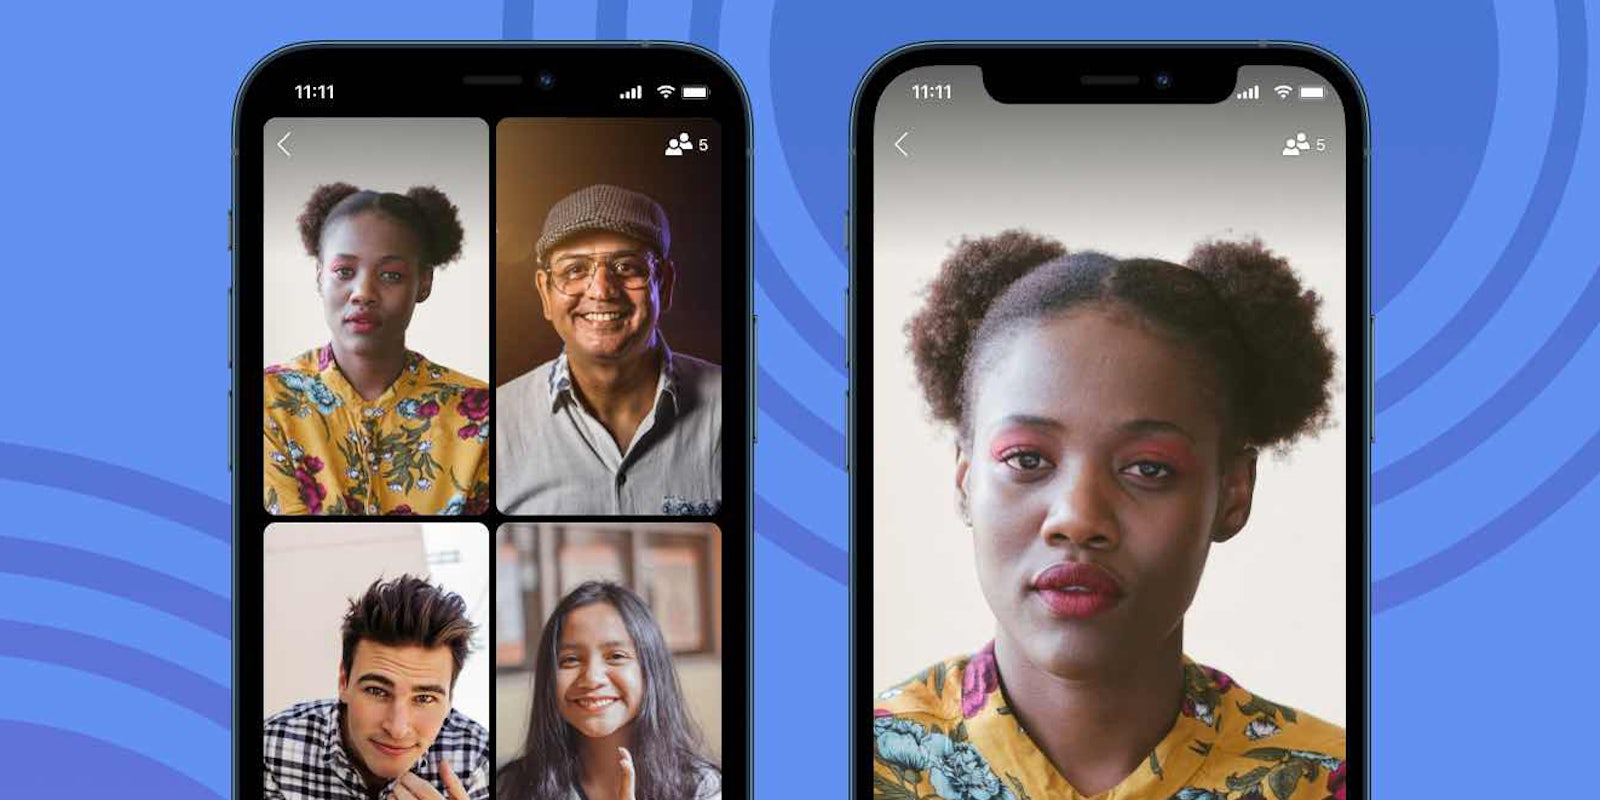 Signal introduced a new feature that allows users to make group video calls.